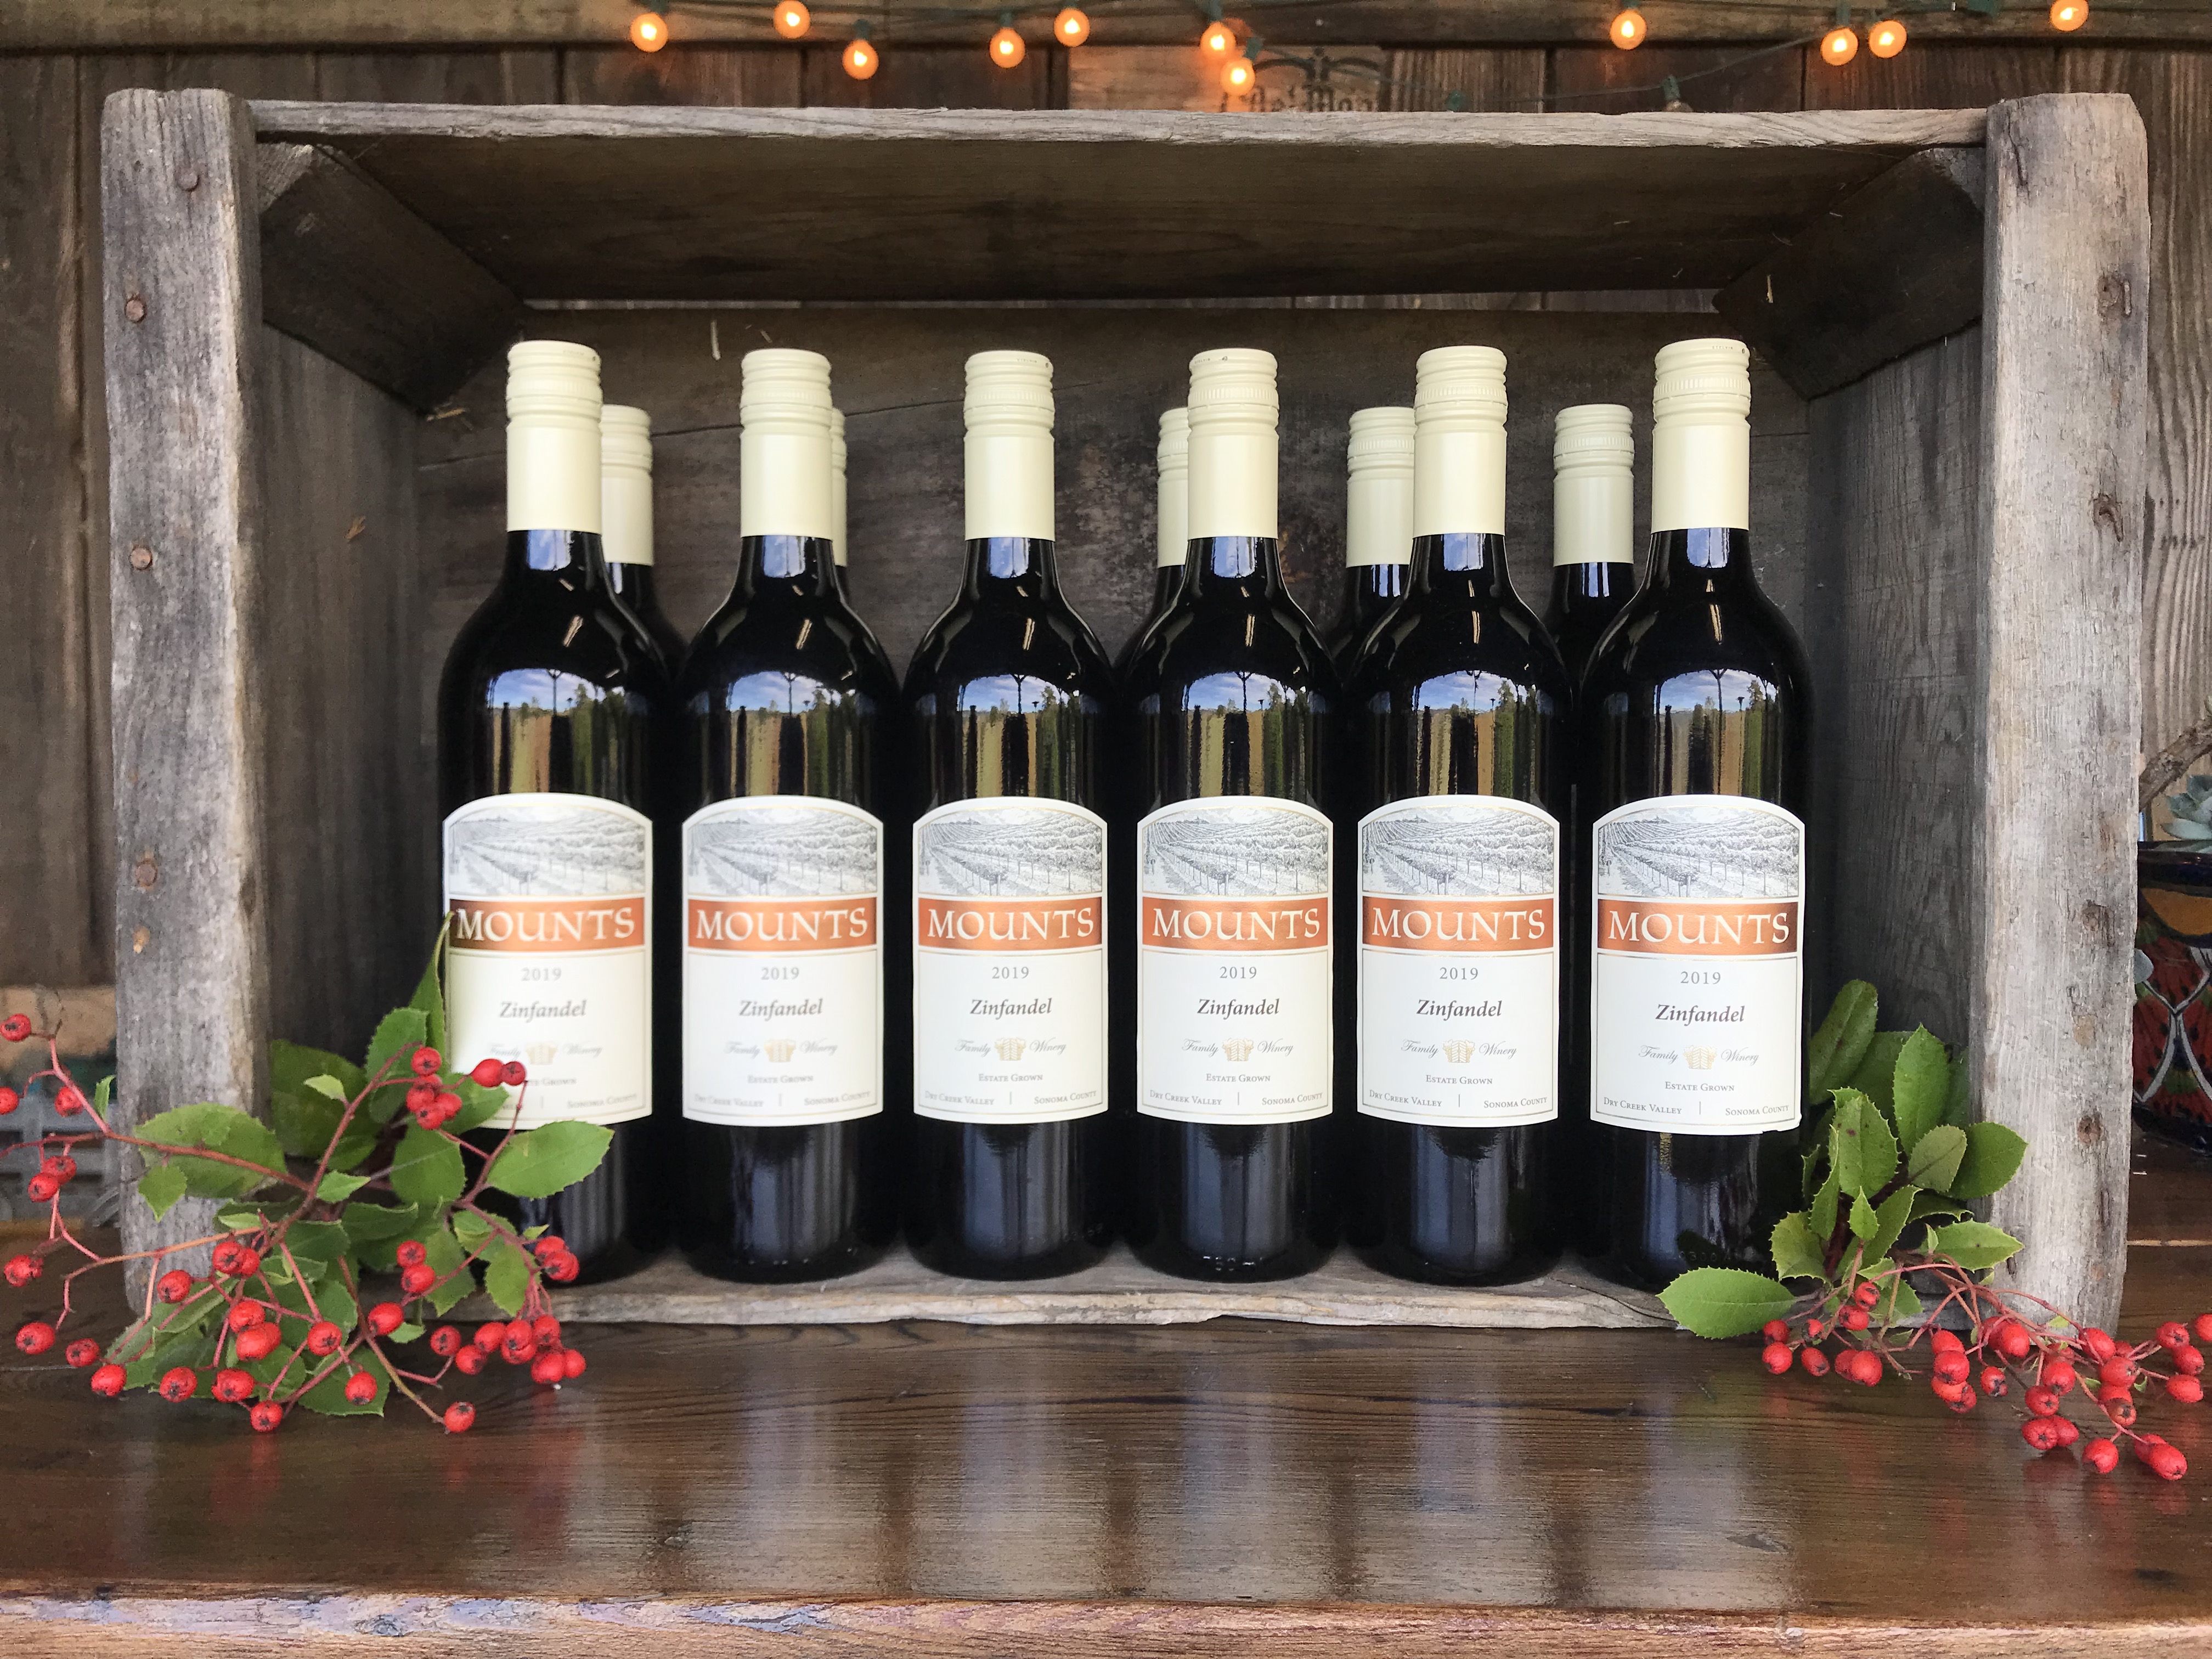 Product Image for Holiday Case Special 2019 Mounts Zinfandel